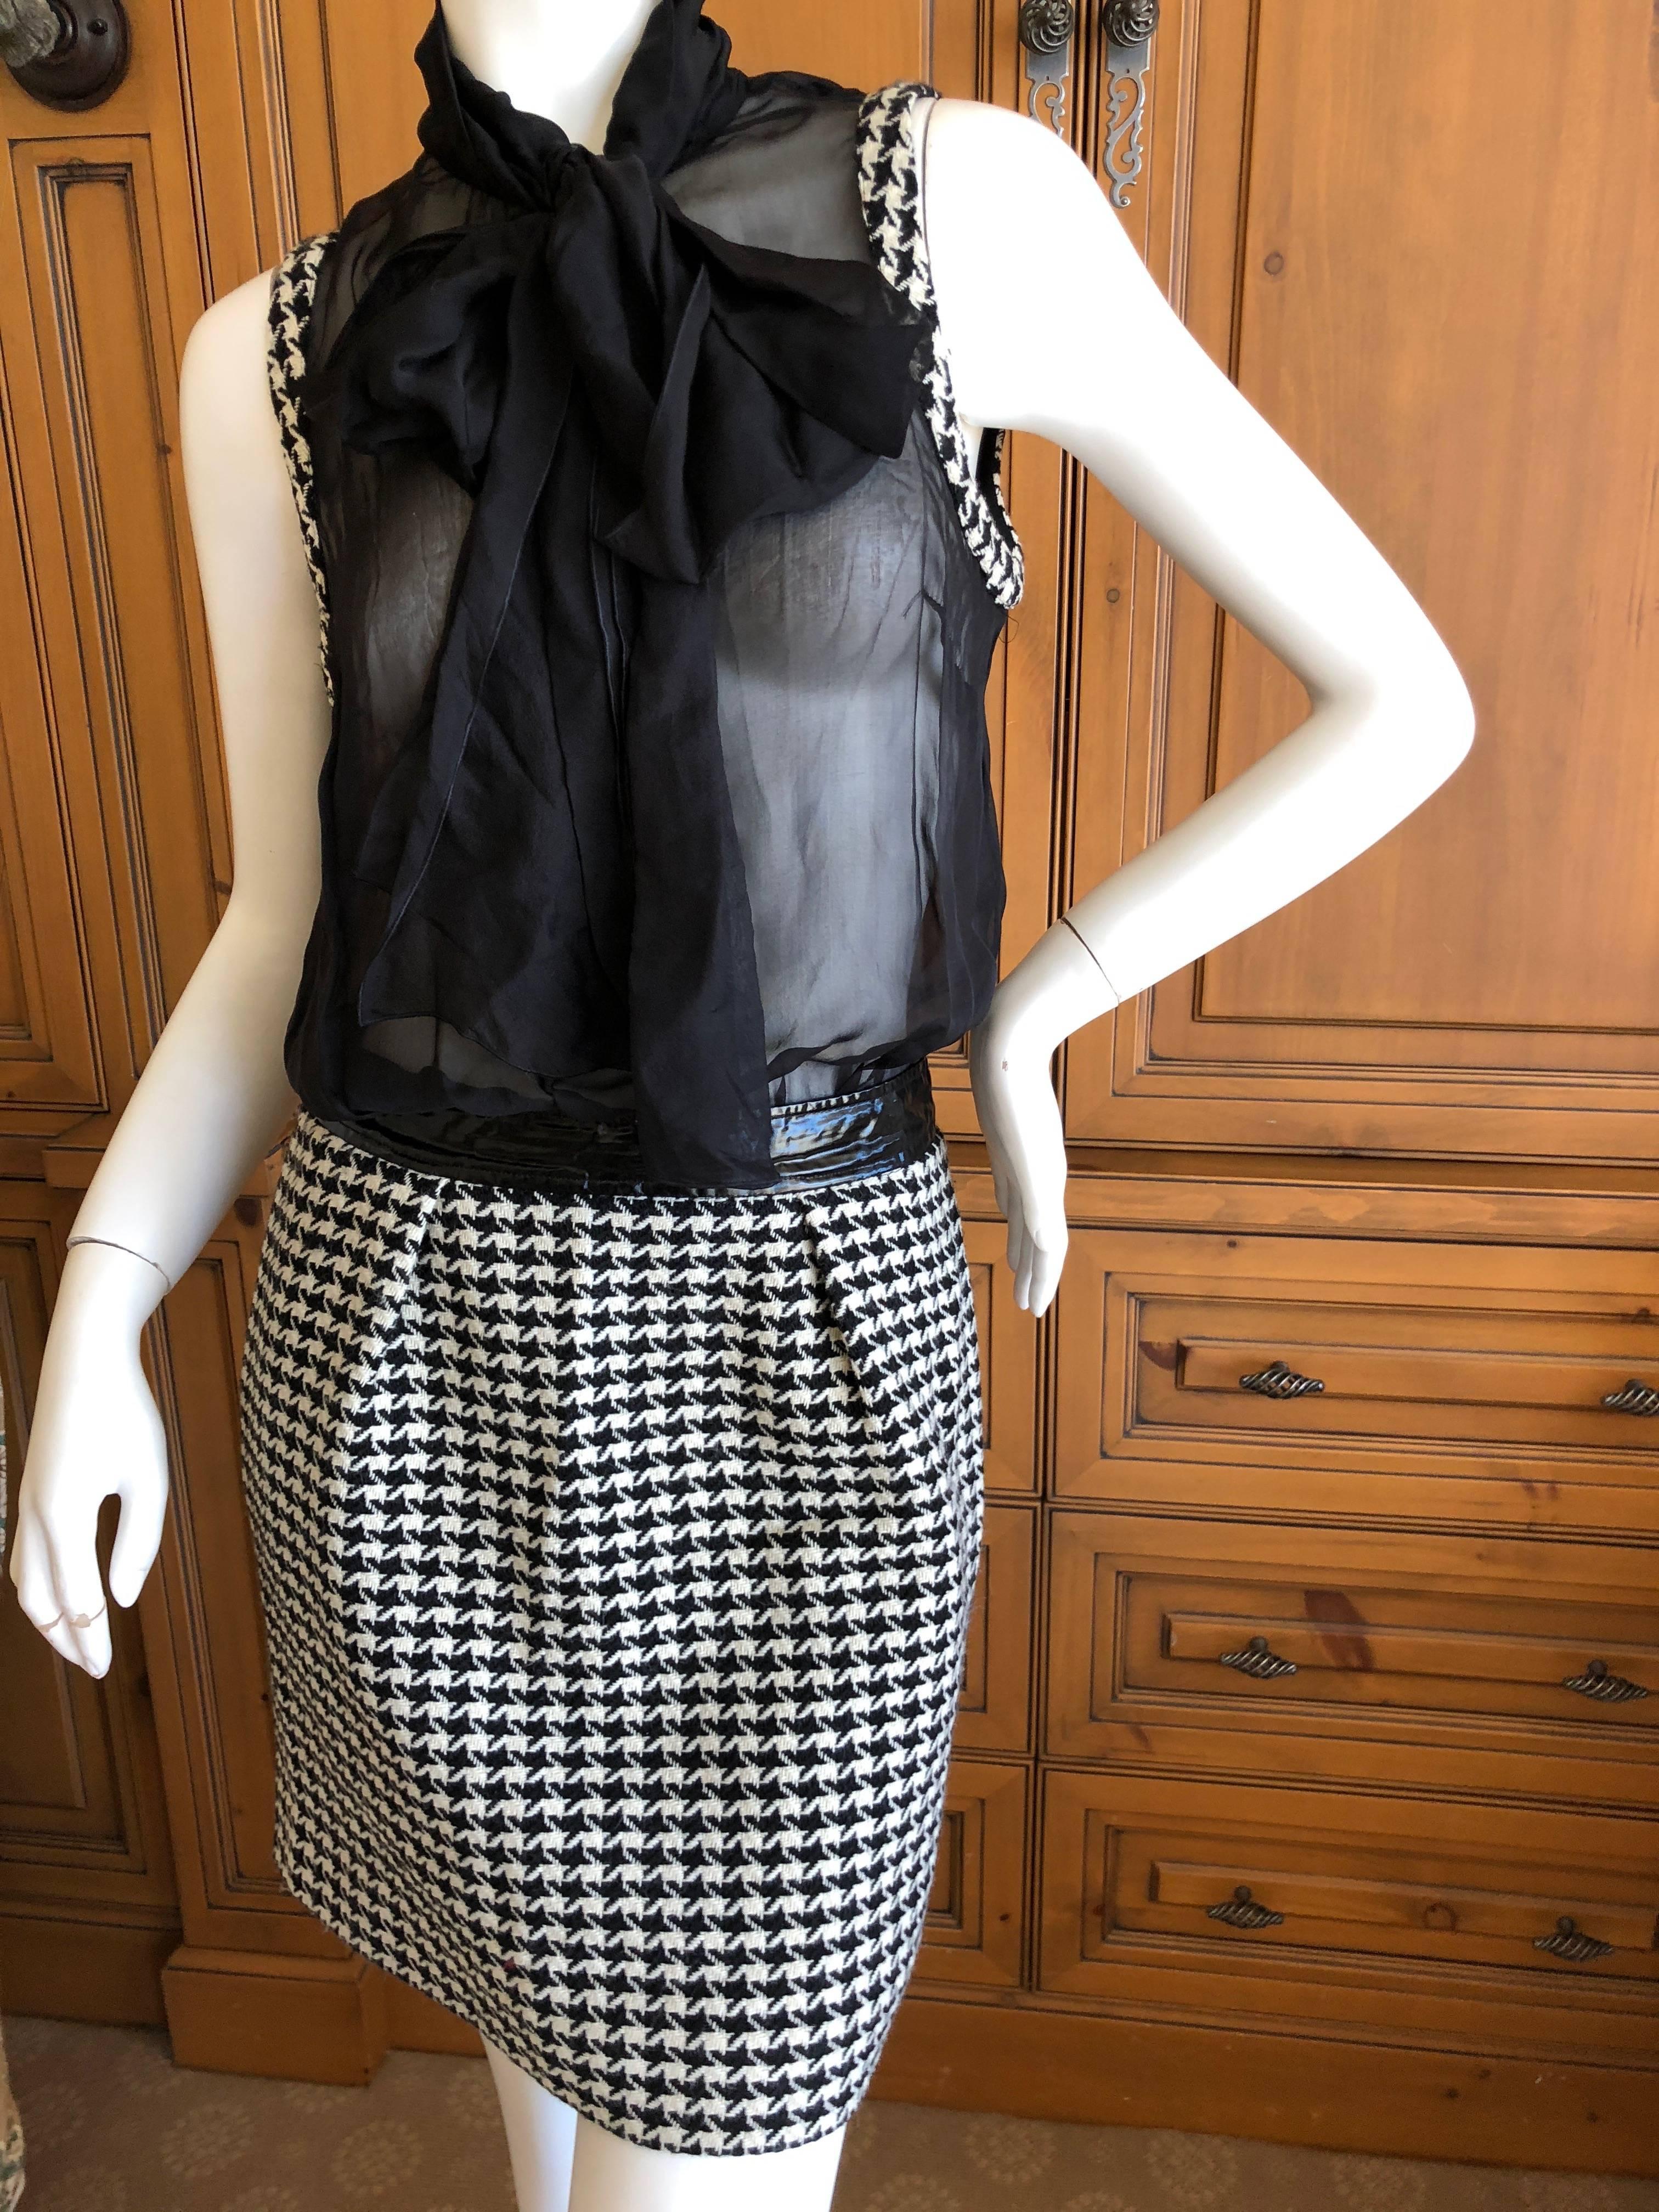 Dolce & Gabbana D&G  sheer houndstooth Cocktail Dress,

  There is  a lot of stretch



Size 36

Bust 34